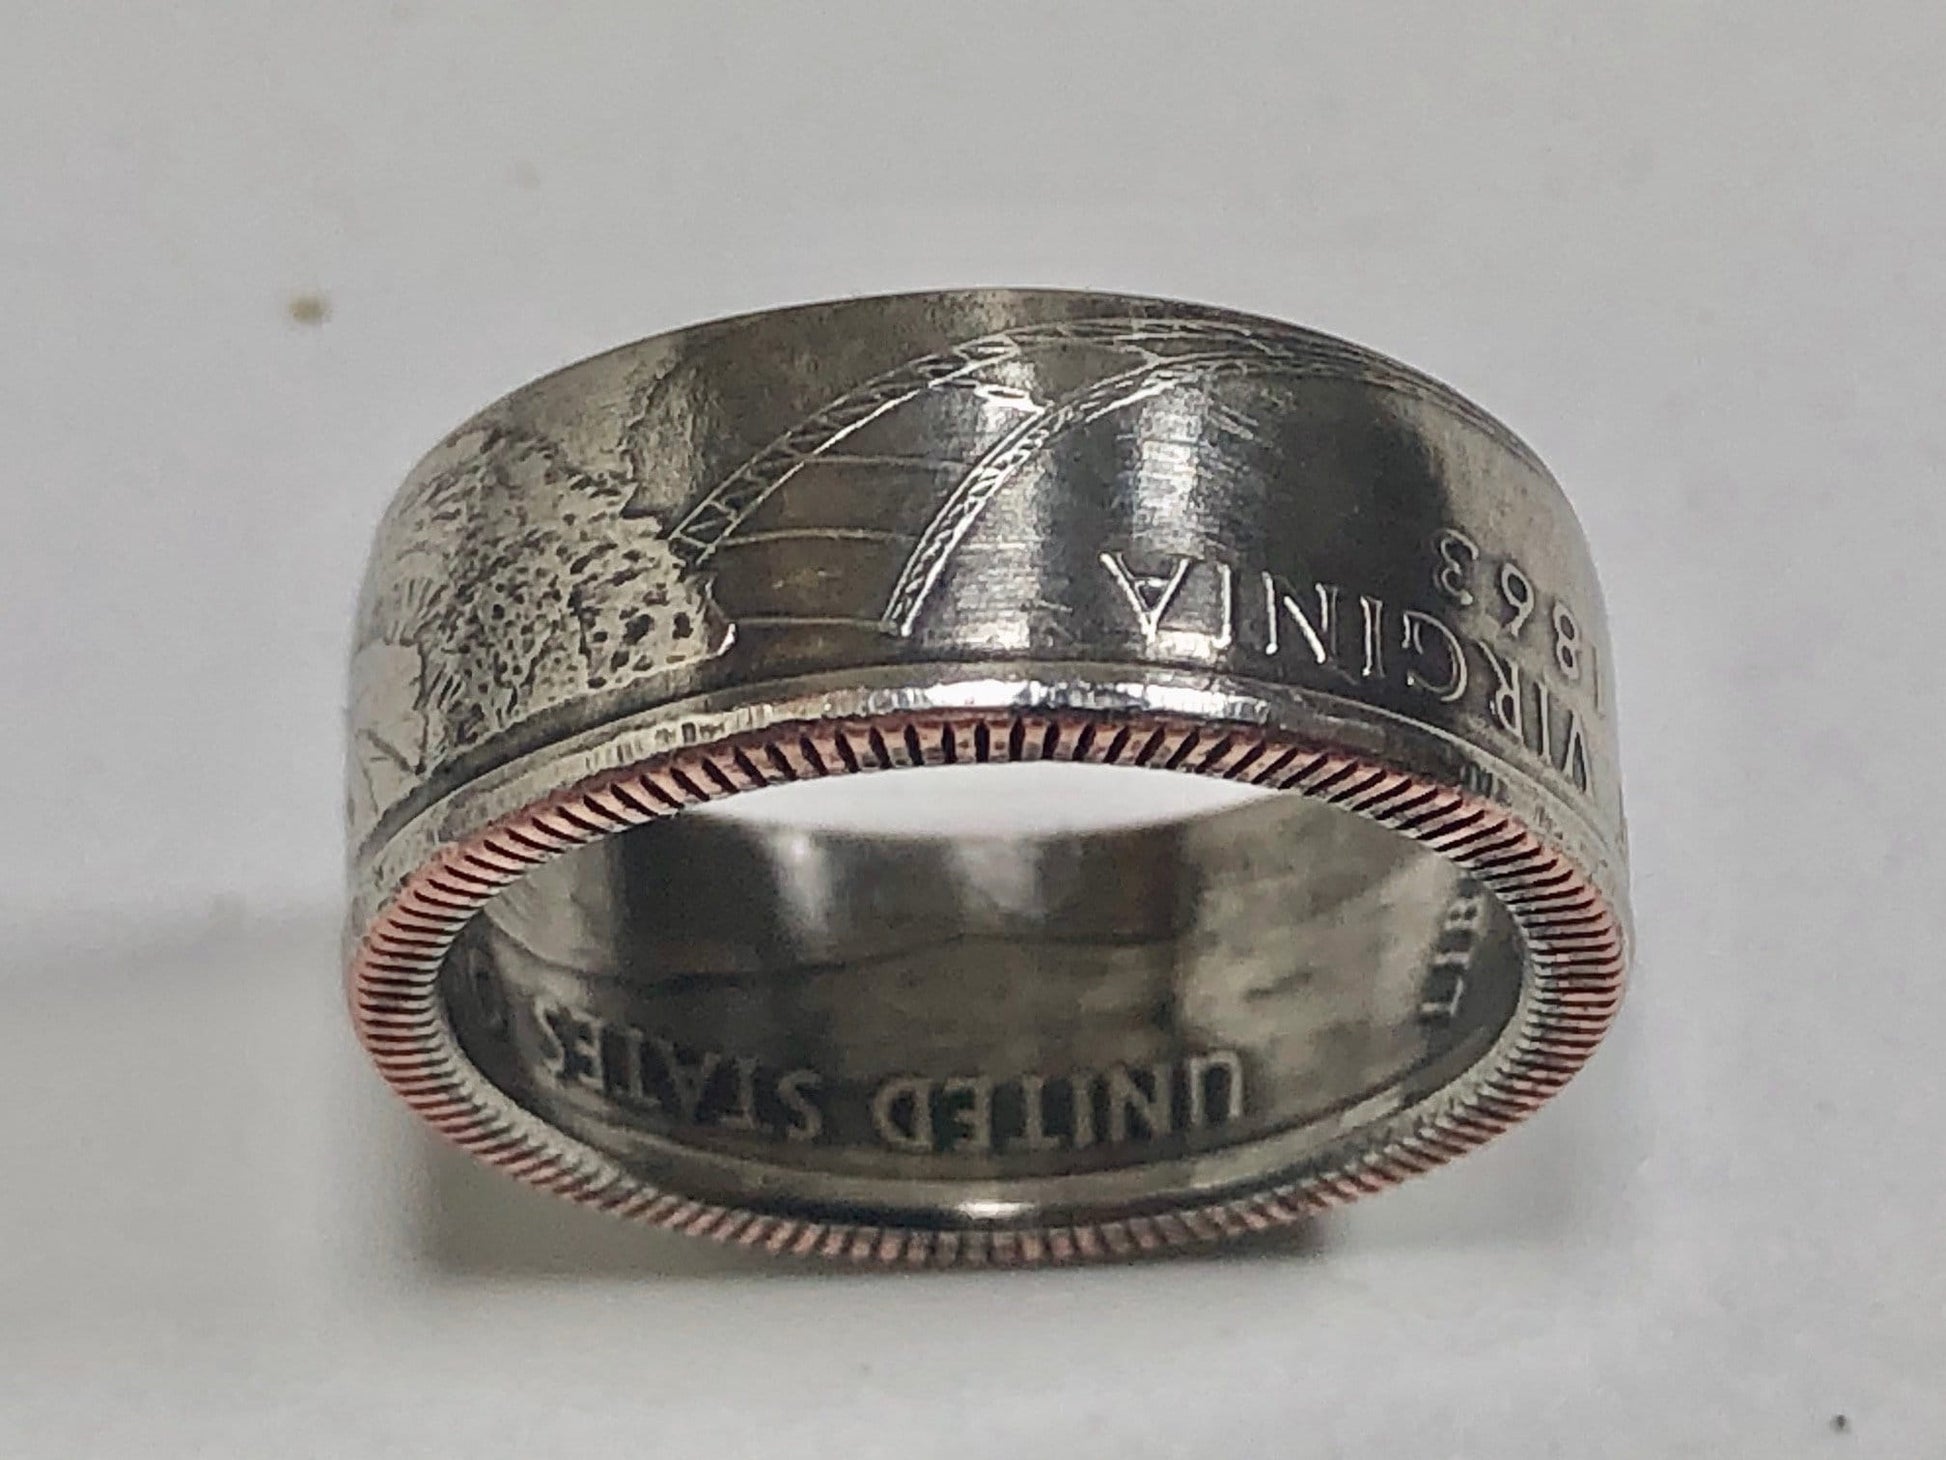 USA Ring West Virginia State Quarter Coin Ring Hand Made